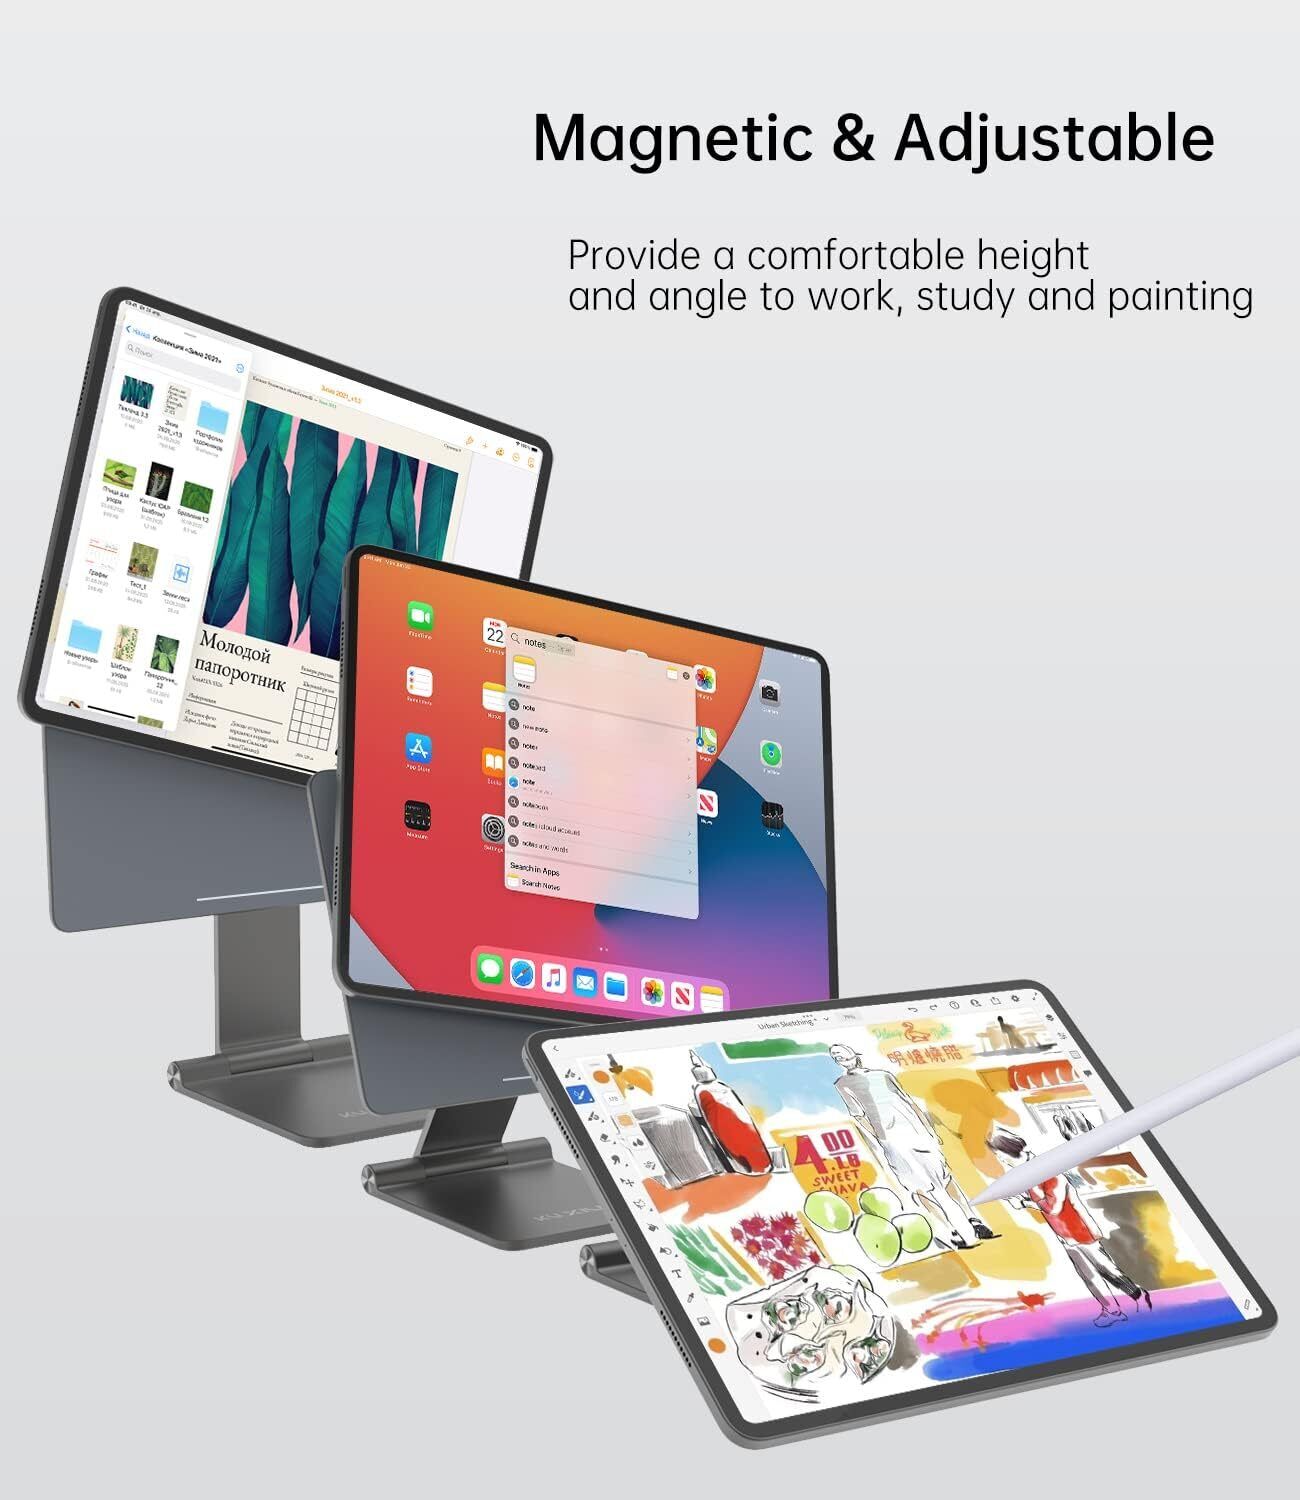 Foldable Magnetic Stand for iPad Pro Portable 360° Adjustable DesktopStand 12.9"